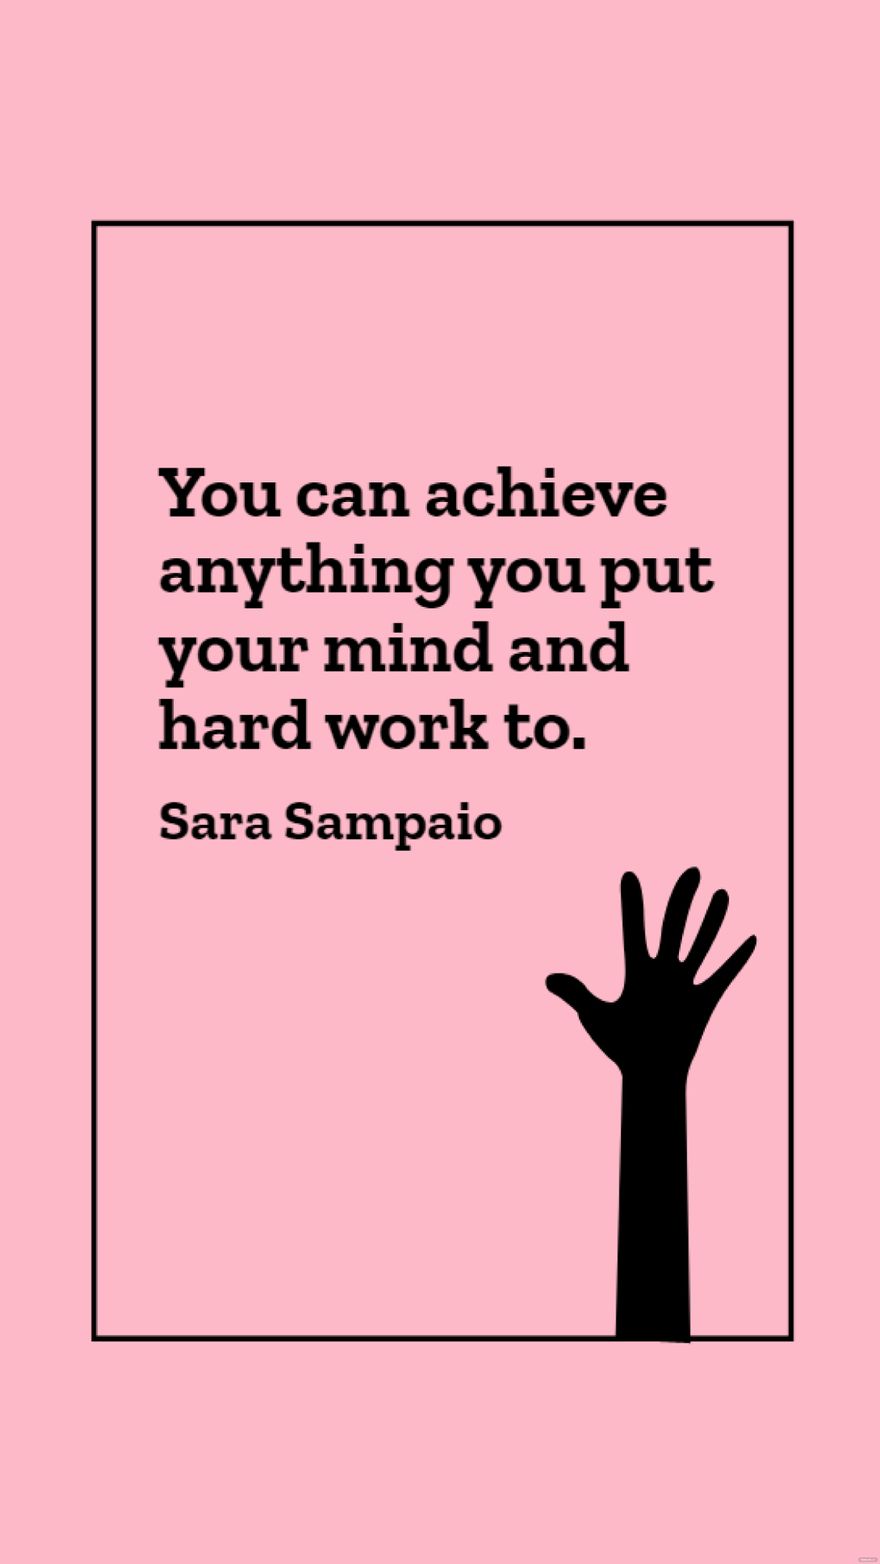 Sara Sampaio - You can achieve anything you put your mind and hard work to. in JPG